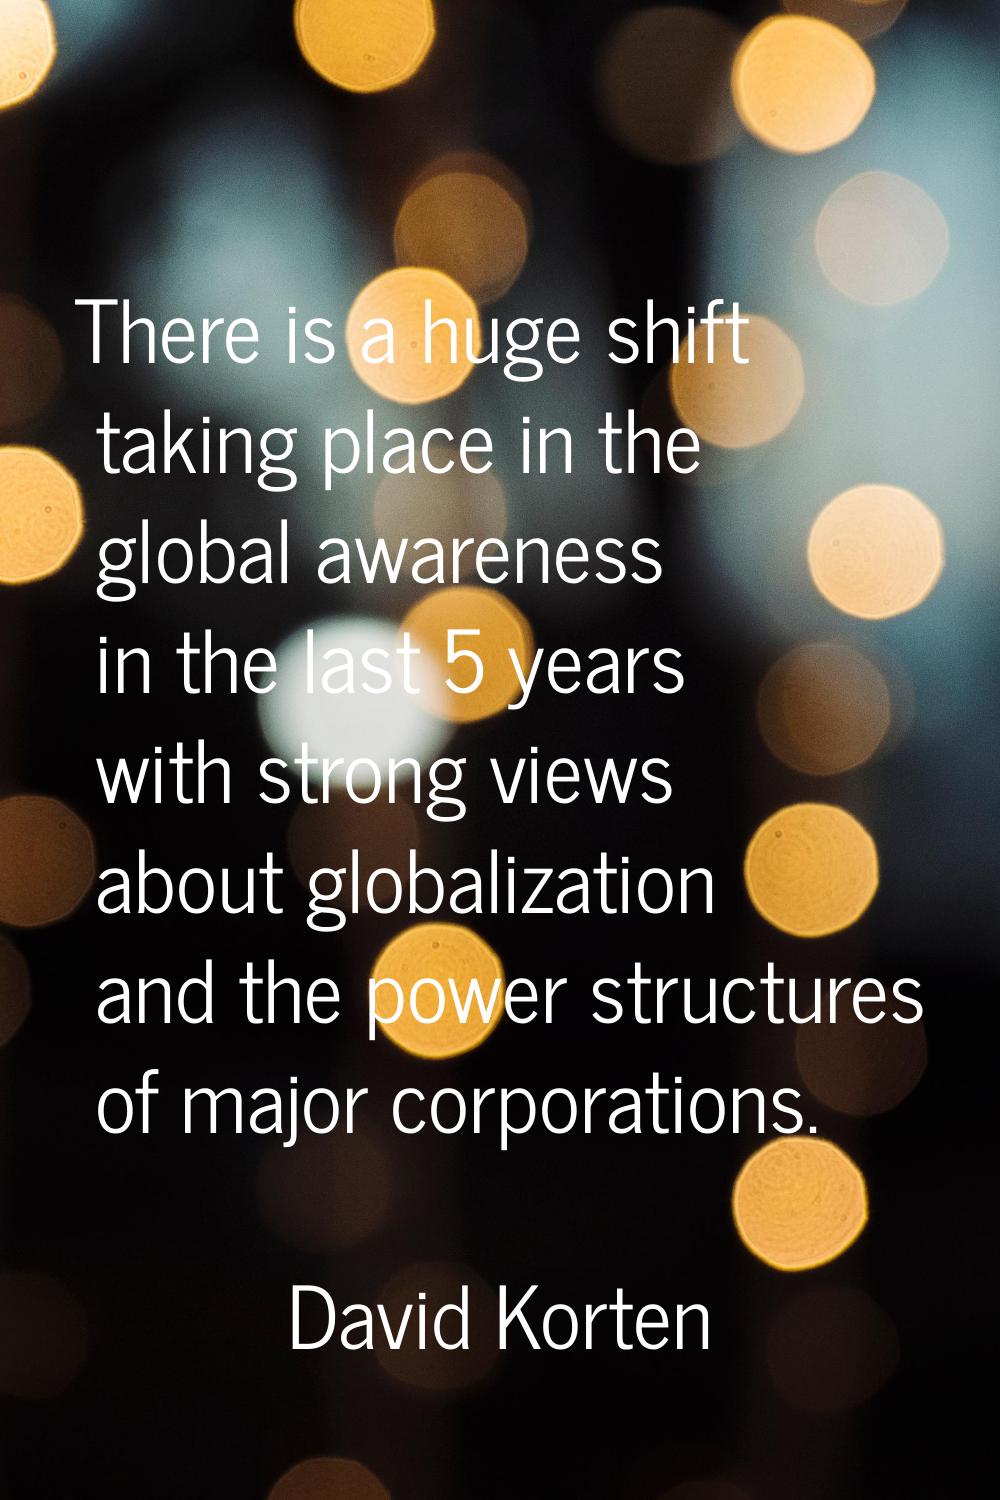 There is a huge shift taking place in the global awareness in the last 5 years with strong views ab